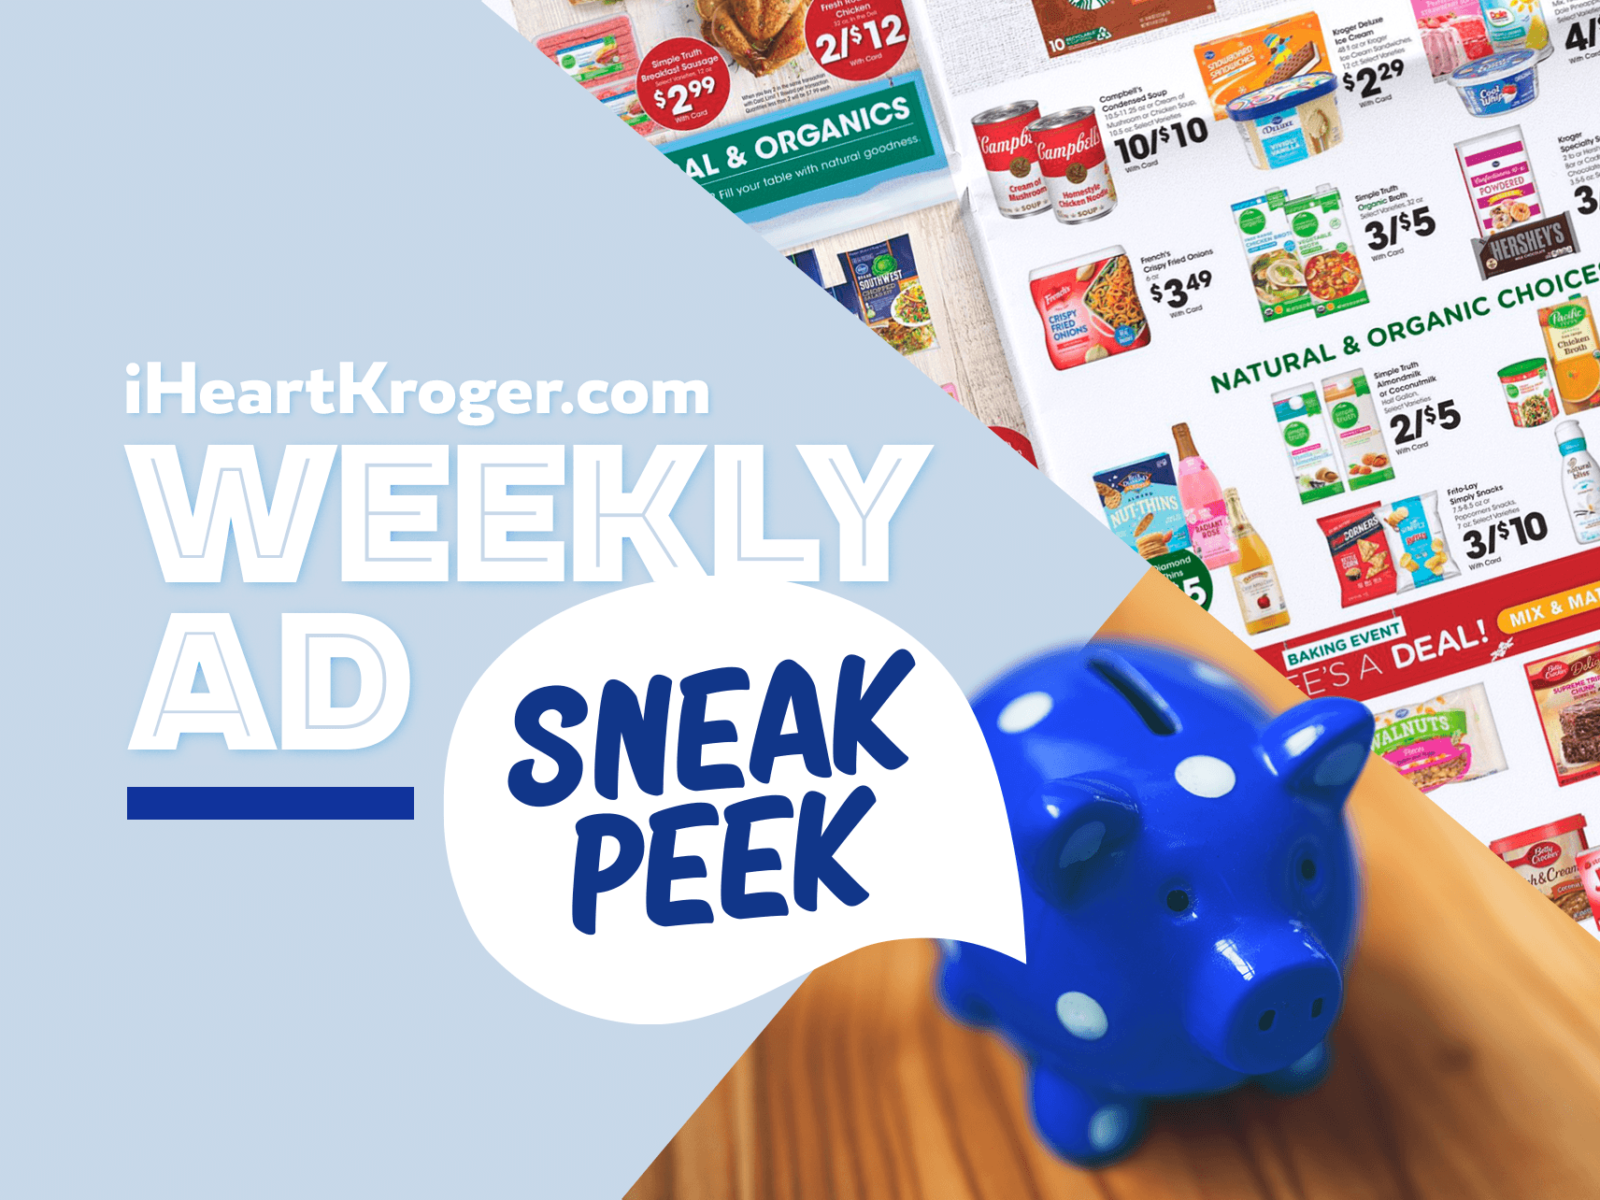 Kroger Ad & Coupons Week Of 9/7 to 9/13